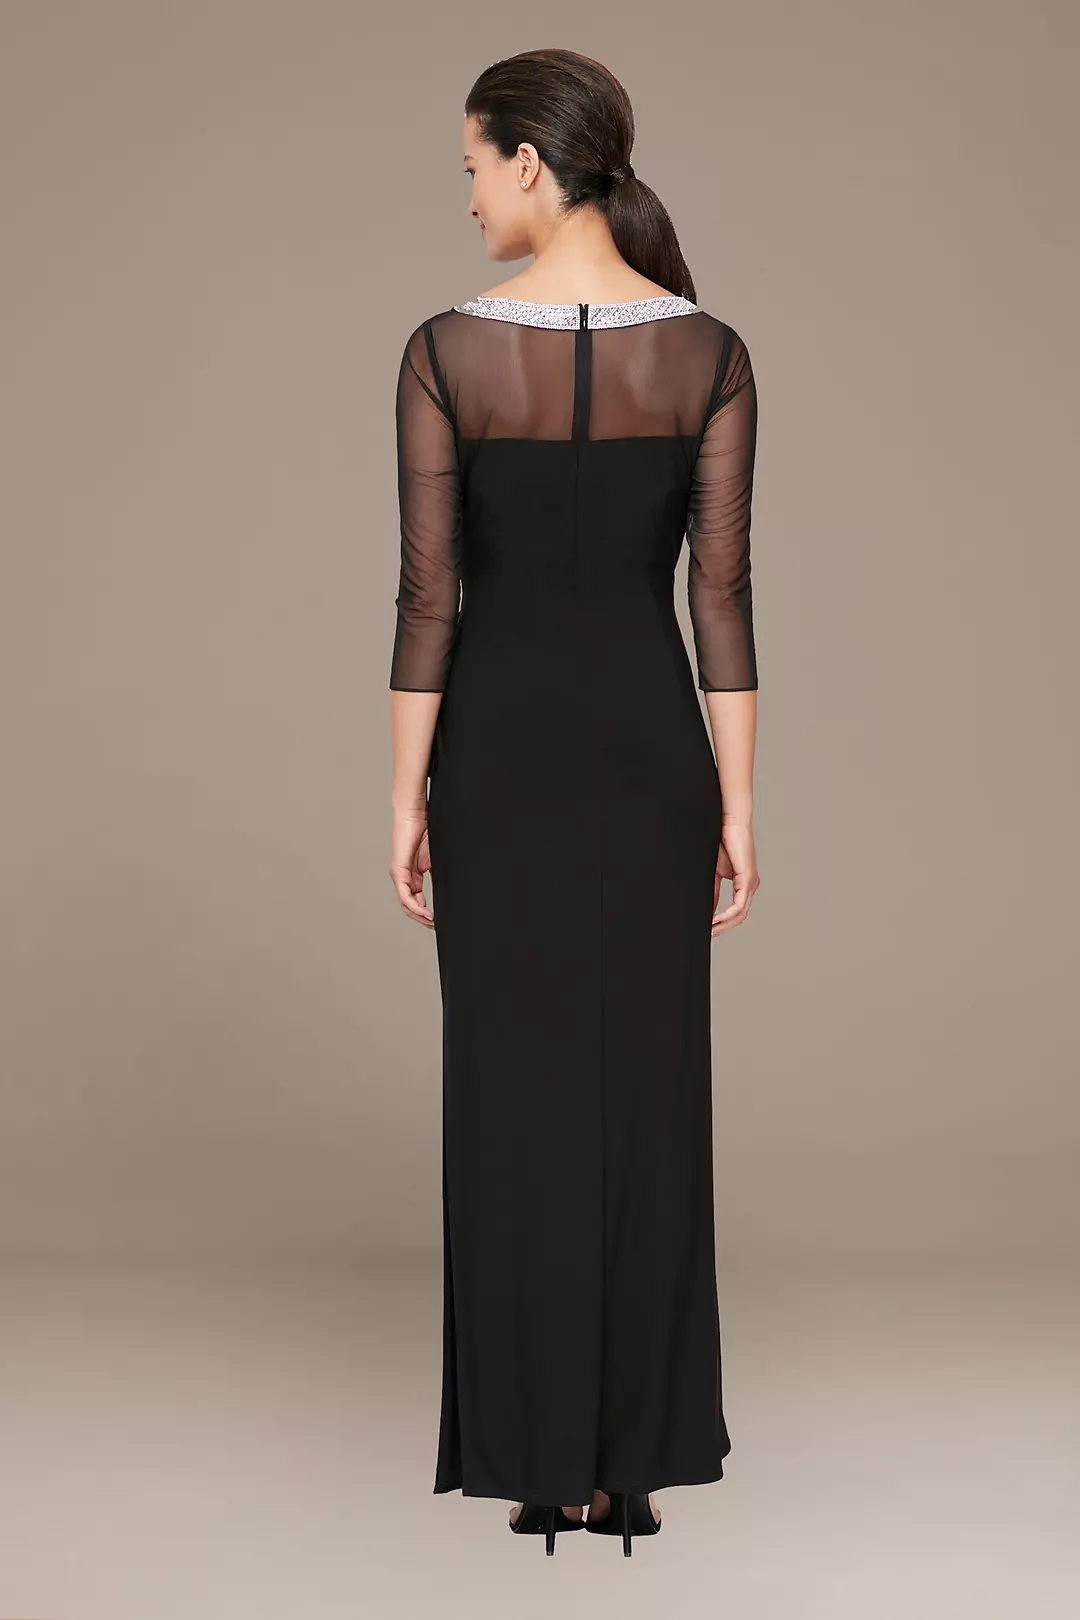 Petite Ruched Sheath with Beaded Illusion Neckline Image 2